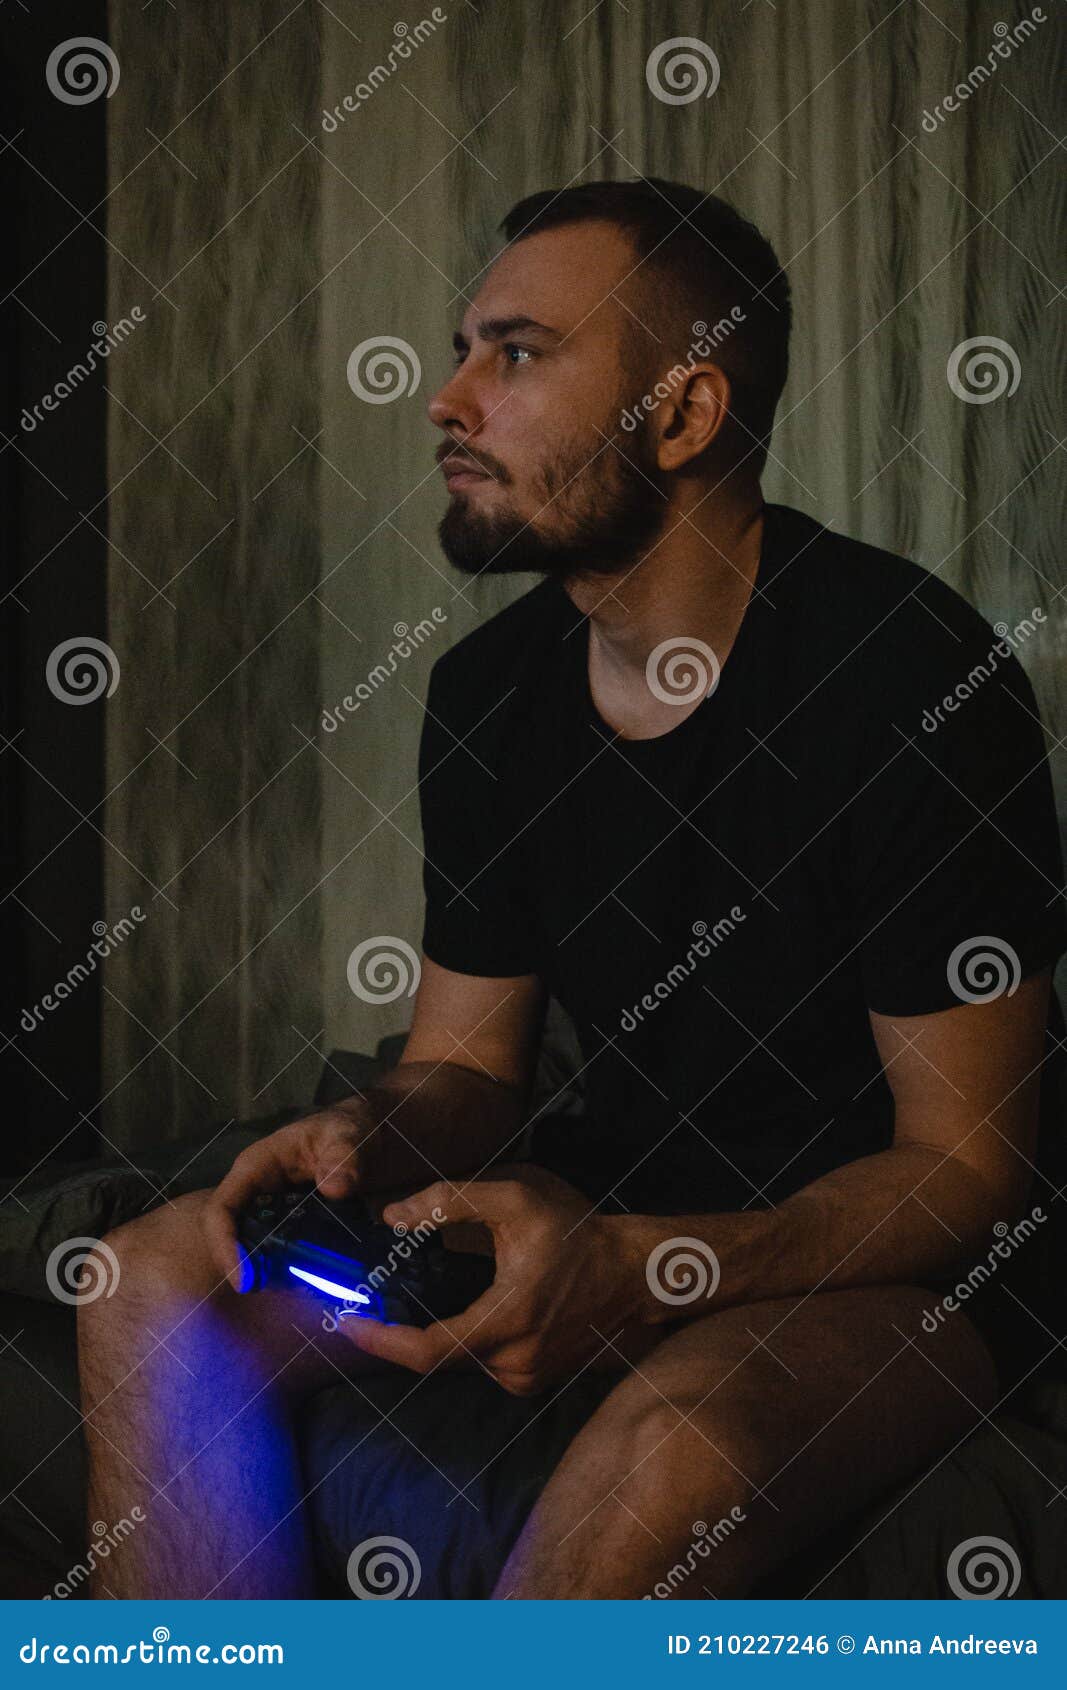 young handsome gamer man with beard in black t-shirt playing video game using joystick with a concetration on smart face thinking